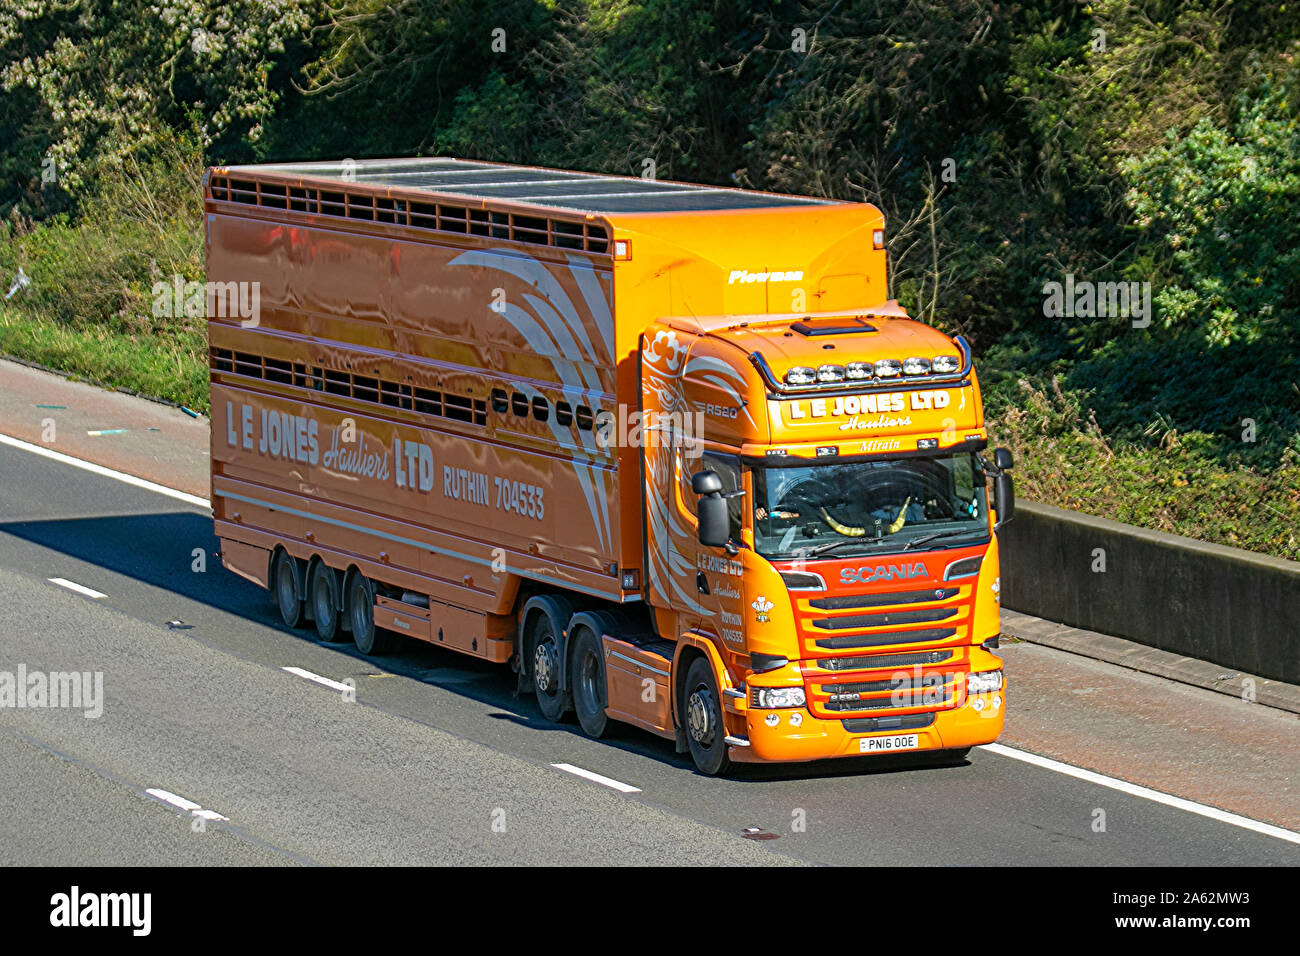 L E JONES Hauliers Ruthin livestock haulage companies; Haulage delivery trucks, lorry, transportation, truck, cargo, Scania R520 vehicle, delivery, commercial transport, industry, supply chain freight, on the M6 at Lancaster, UK Stock Photo